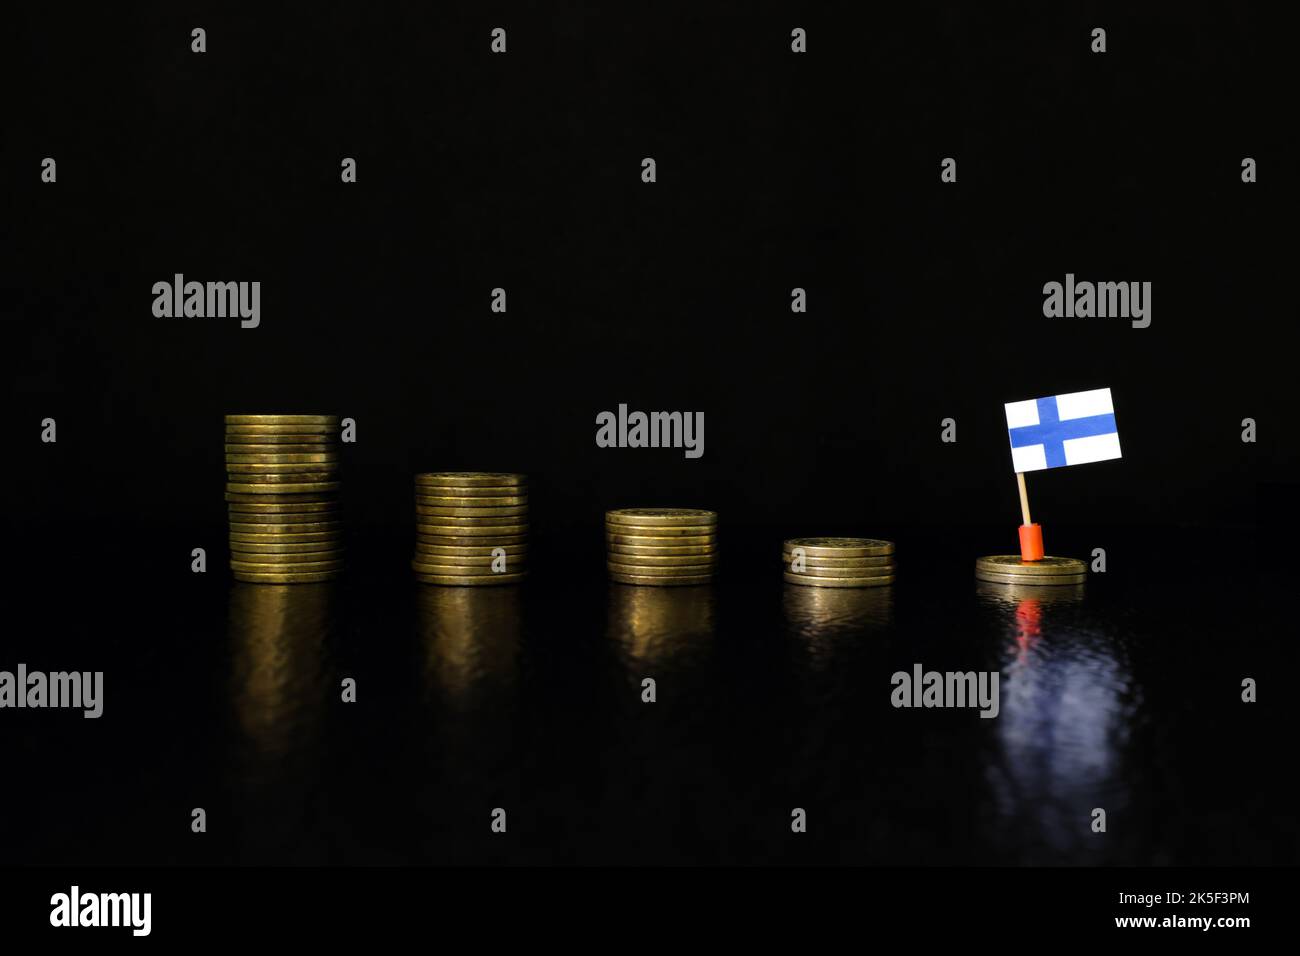 Finland economic recession, financial crisis and currency depreciation concept. Finnish flag in decreasing stack of coins in dark black background. Stock Photo